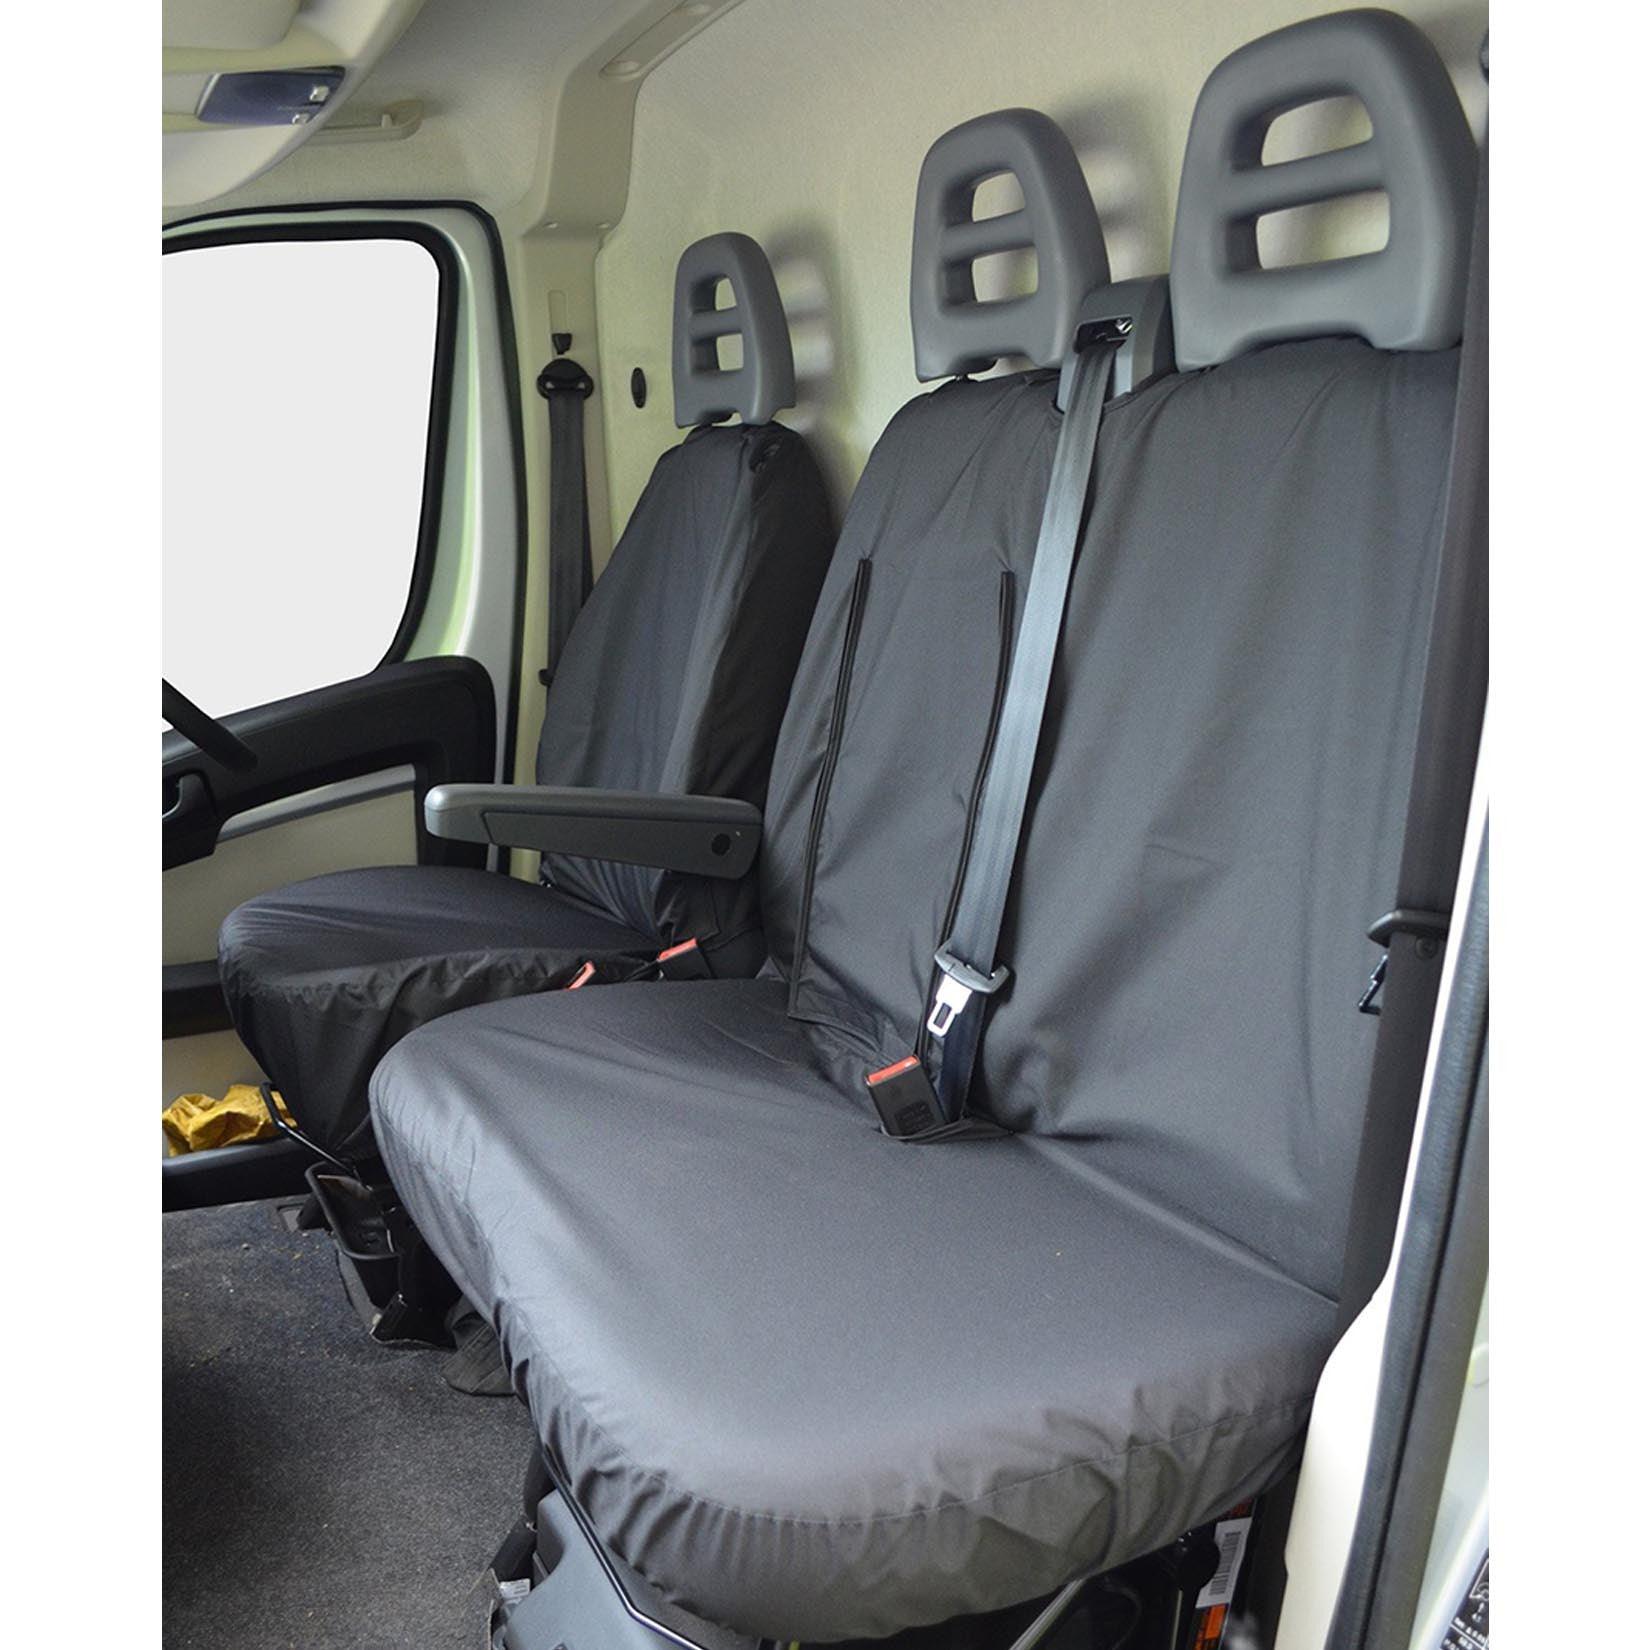 FIAT DUCATO VAN 2006 ON DRIVER SEAT AND DOUBLE PASSENGER SEAT COVERS - BLACK - Storm Xccessories2